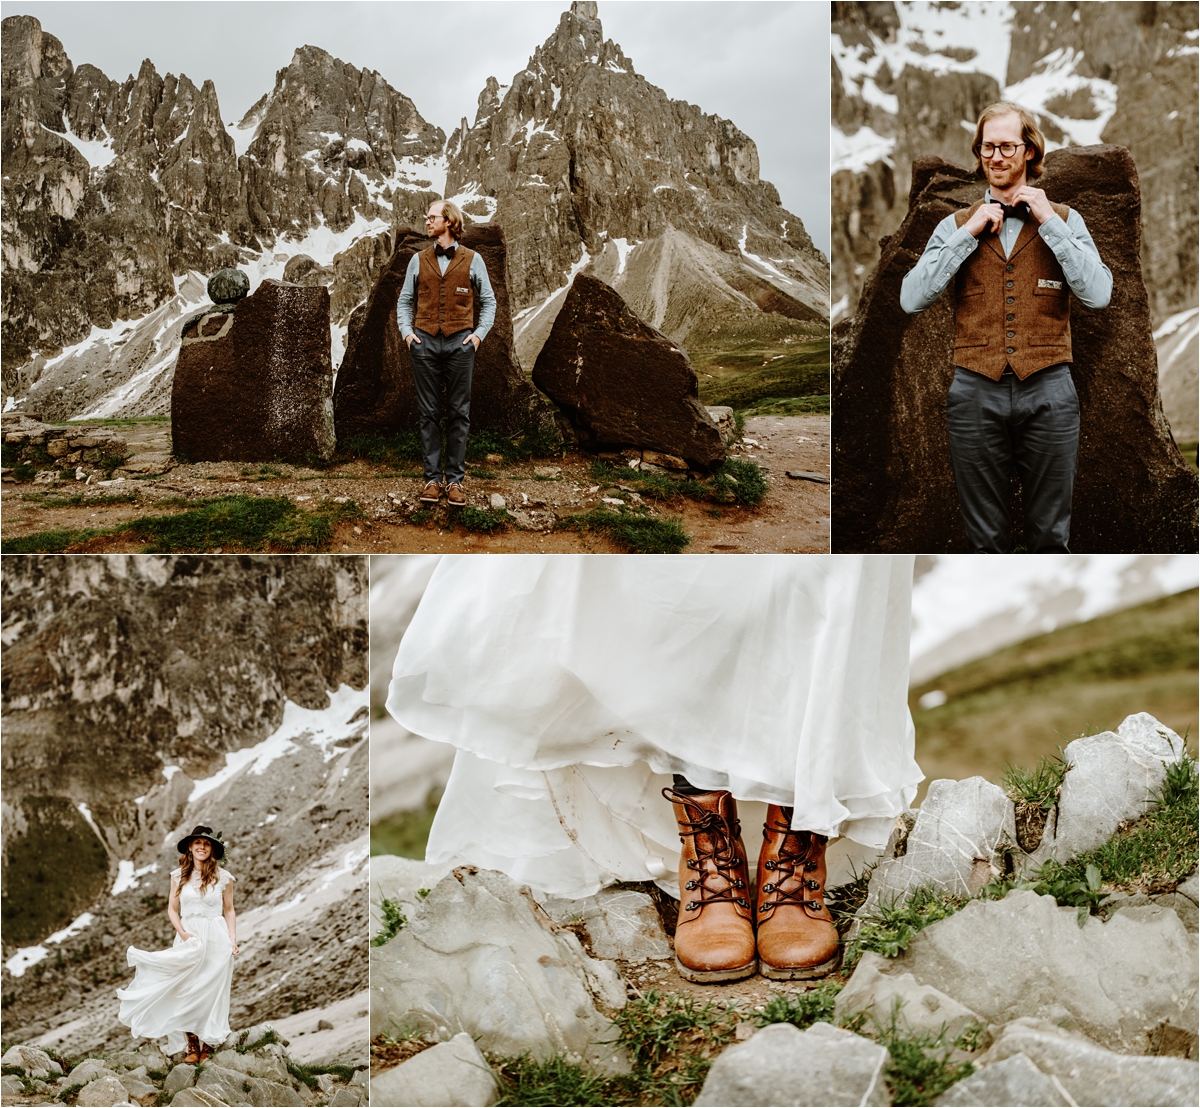 The bride and groom's details for their adventure elopement in the Italian Dolomites. Photography by Wild Connections Photography